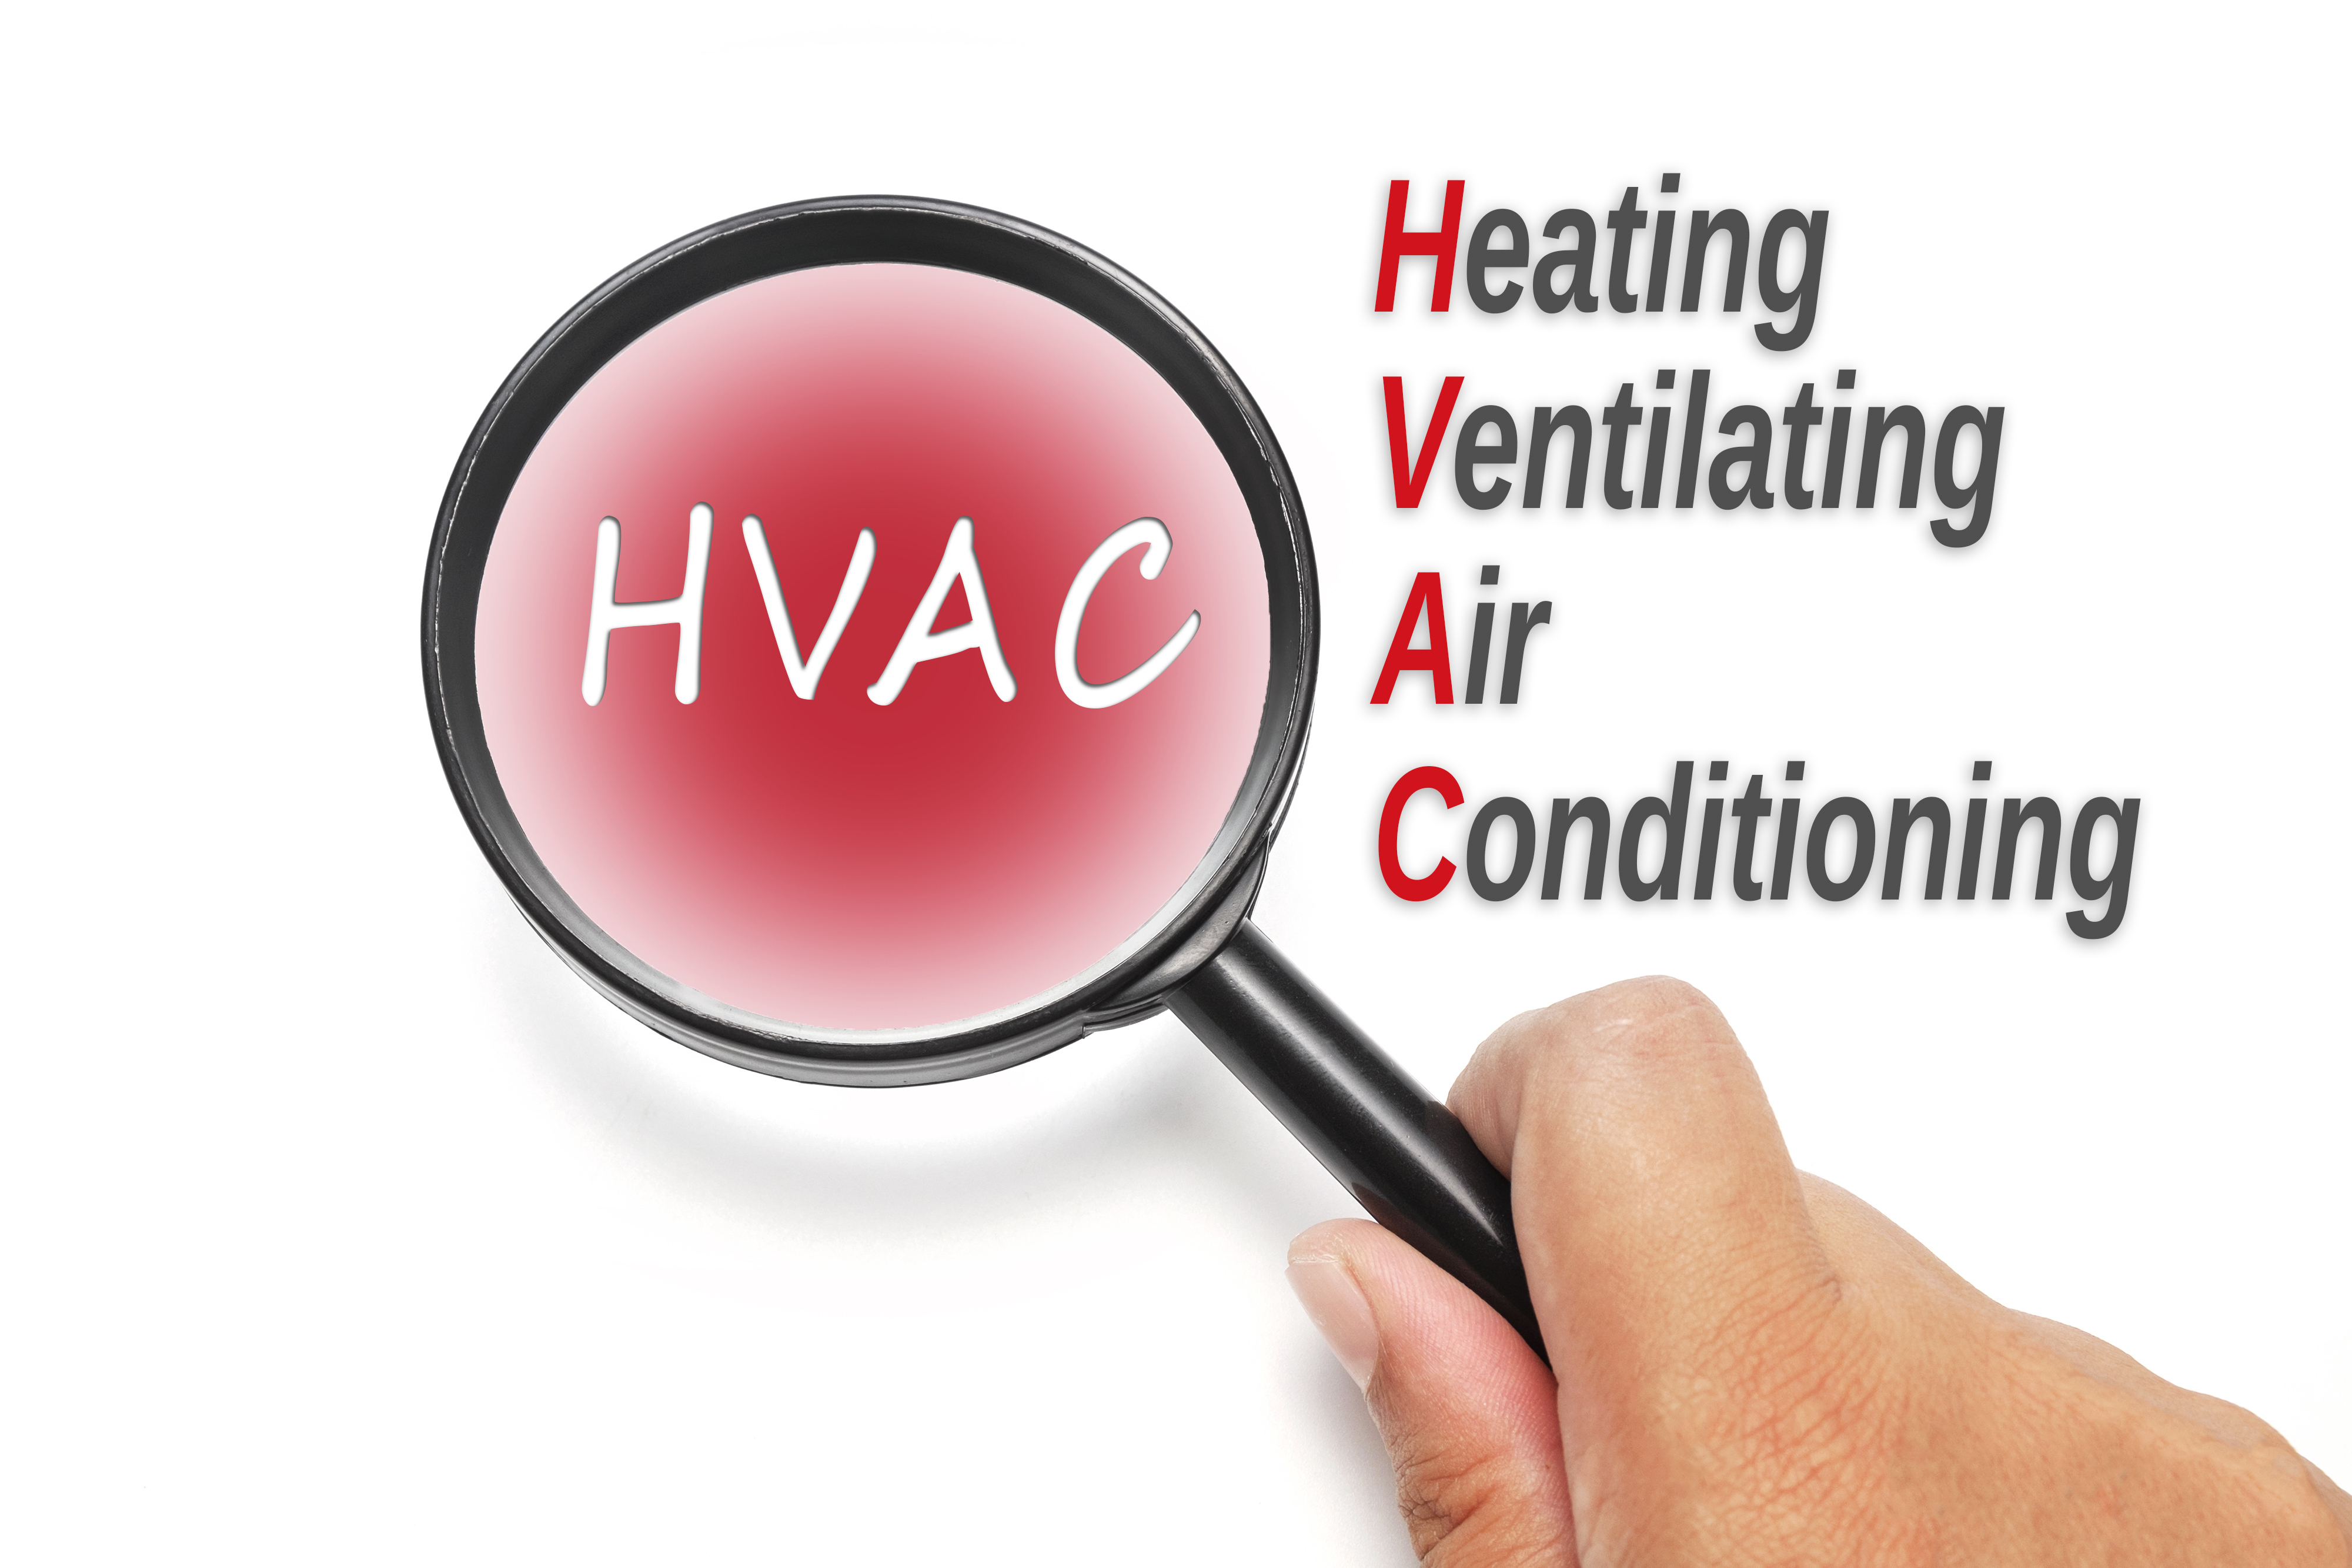 Top local AC repair services and HVAC Contractors in your local California area